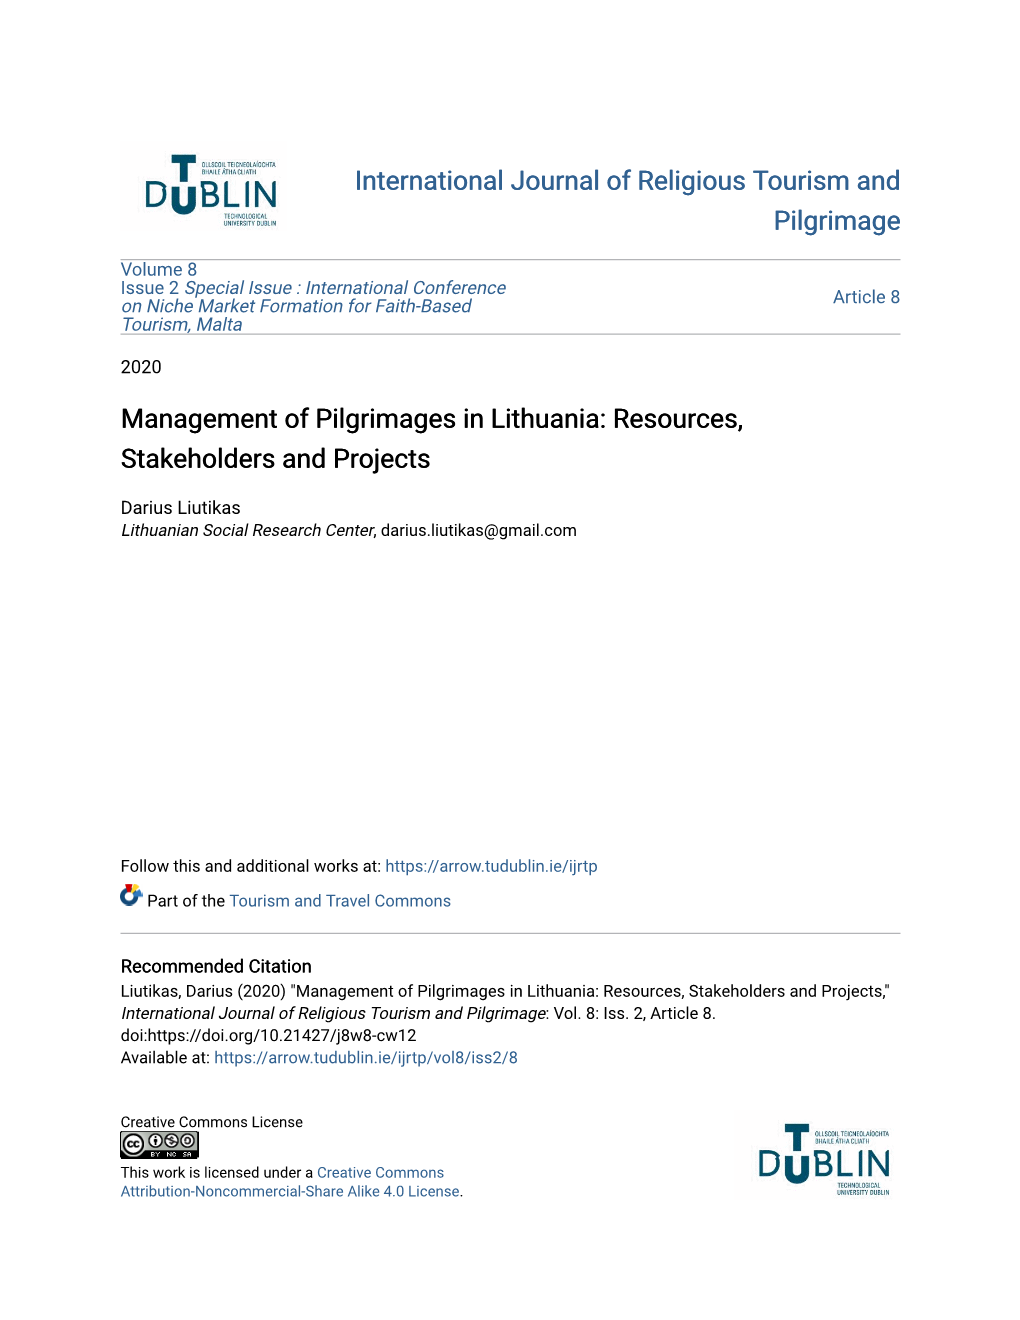 Management of Pilgrimages in Lithuania: Resources, Stakeholders and Projects